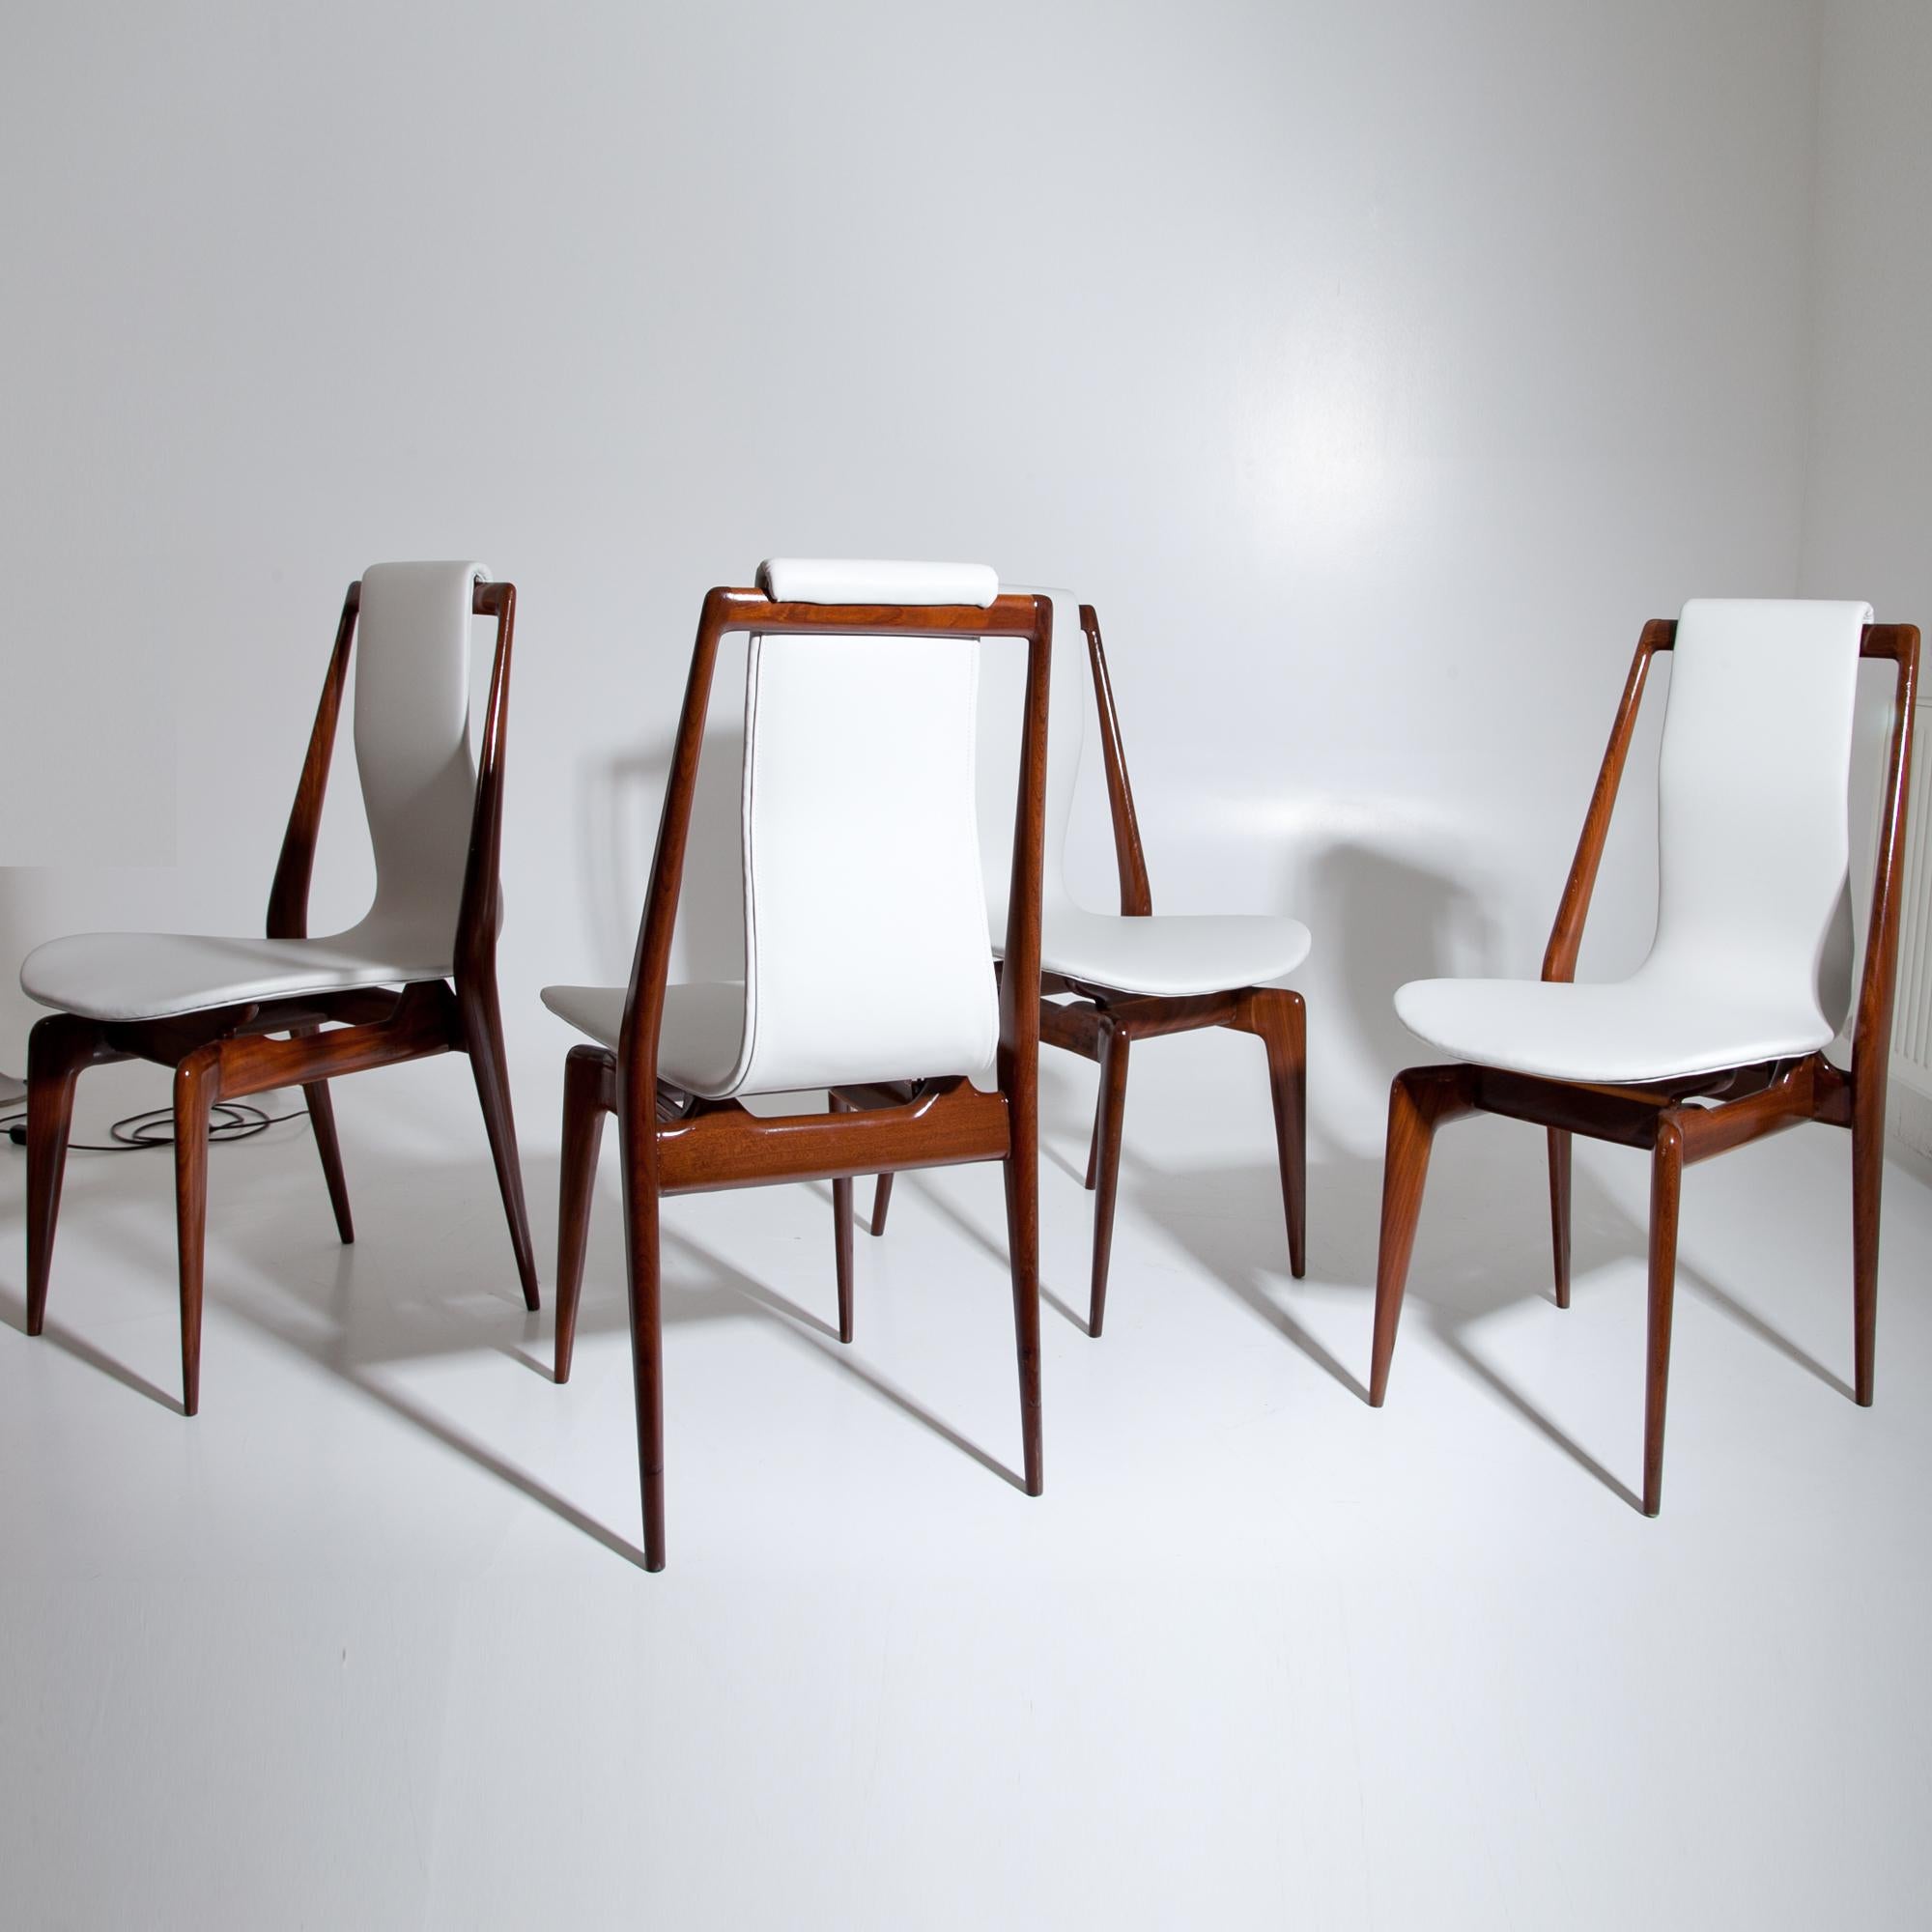 Italian Midcentury Chairs Attributed to Dassi, Italy 1950s